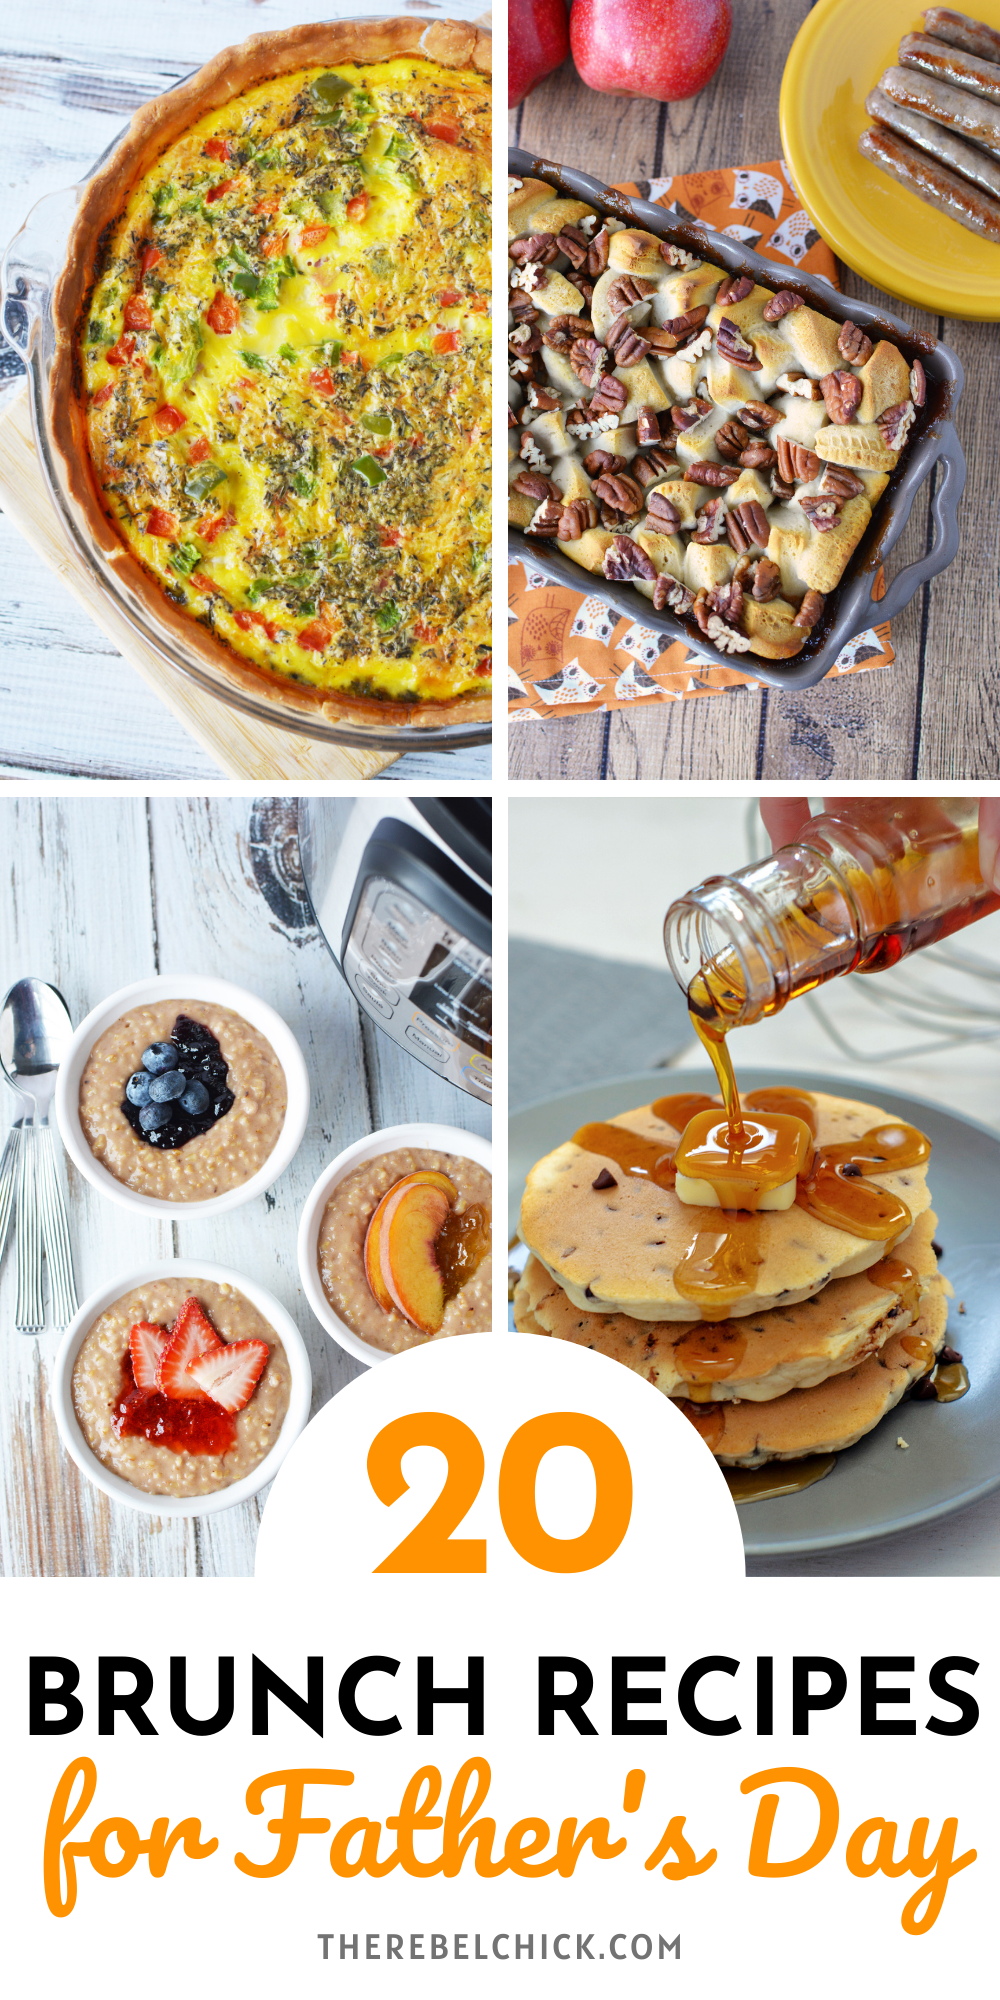 20 Brunch Recipes to Try For Father’s Day